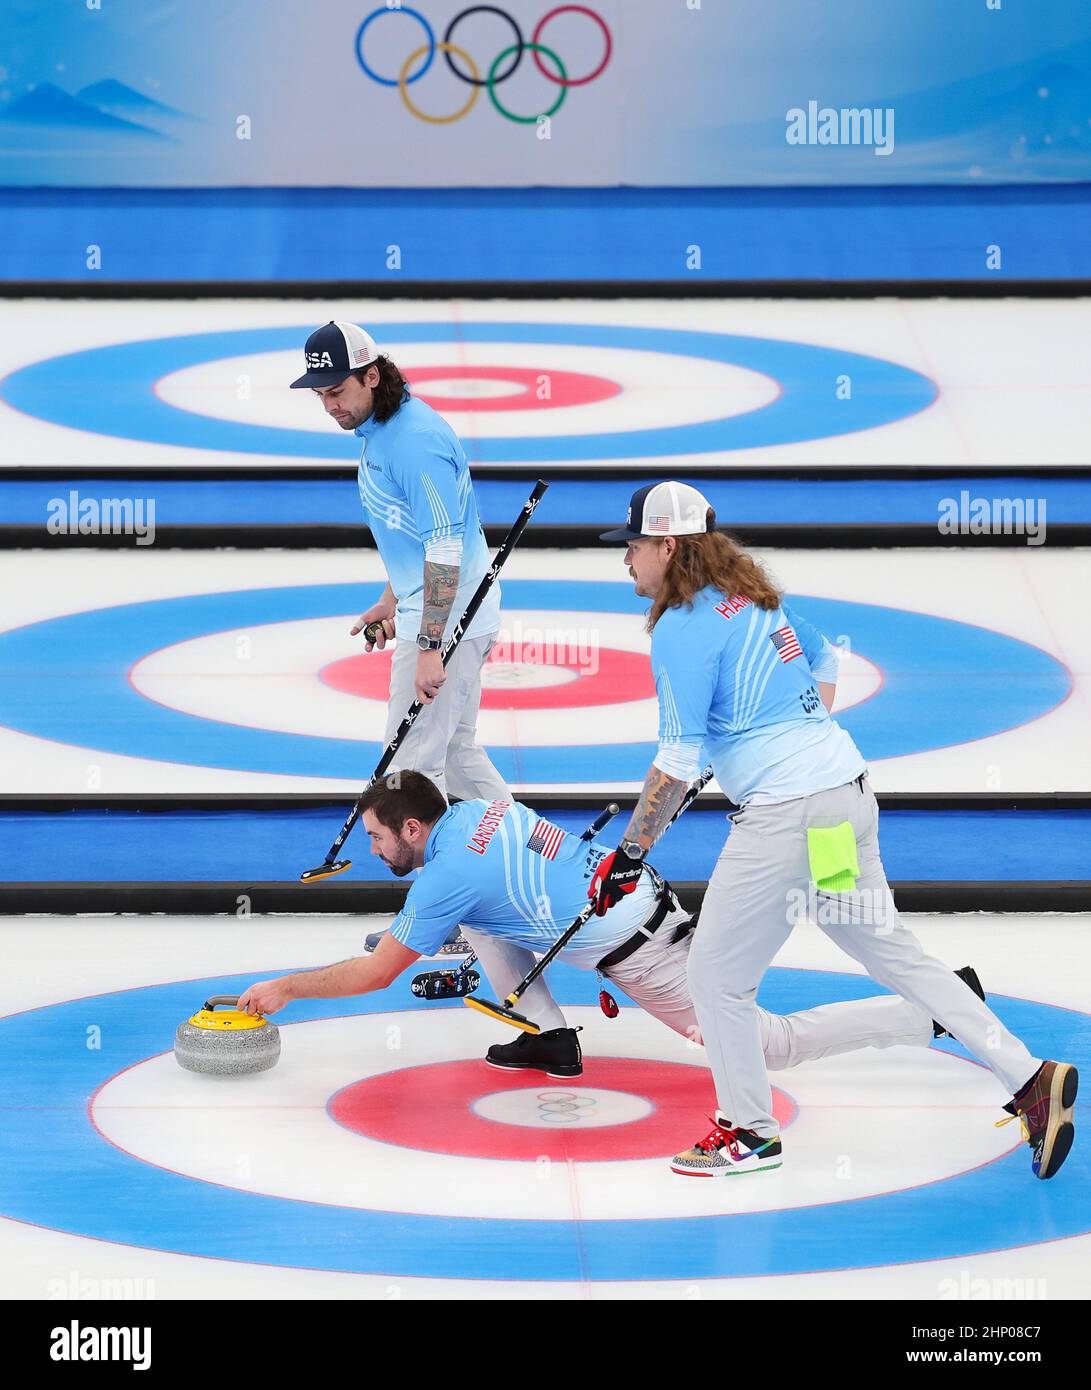 Beijing, China. 18th Feb, 2022. John Landsteiner (C) curls the stone during the curling men's bronze medal game of Beijing 2022 Winter Olympics between Canada and the United States at National Aquatics Centre in Beijing, capital of China, Feb. 18, 2022. Credit: Liu Xu/Xinhua/Alamy Live News Stock Photo